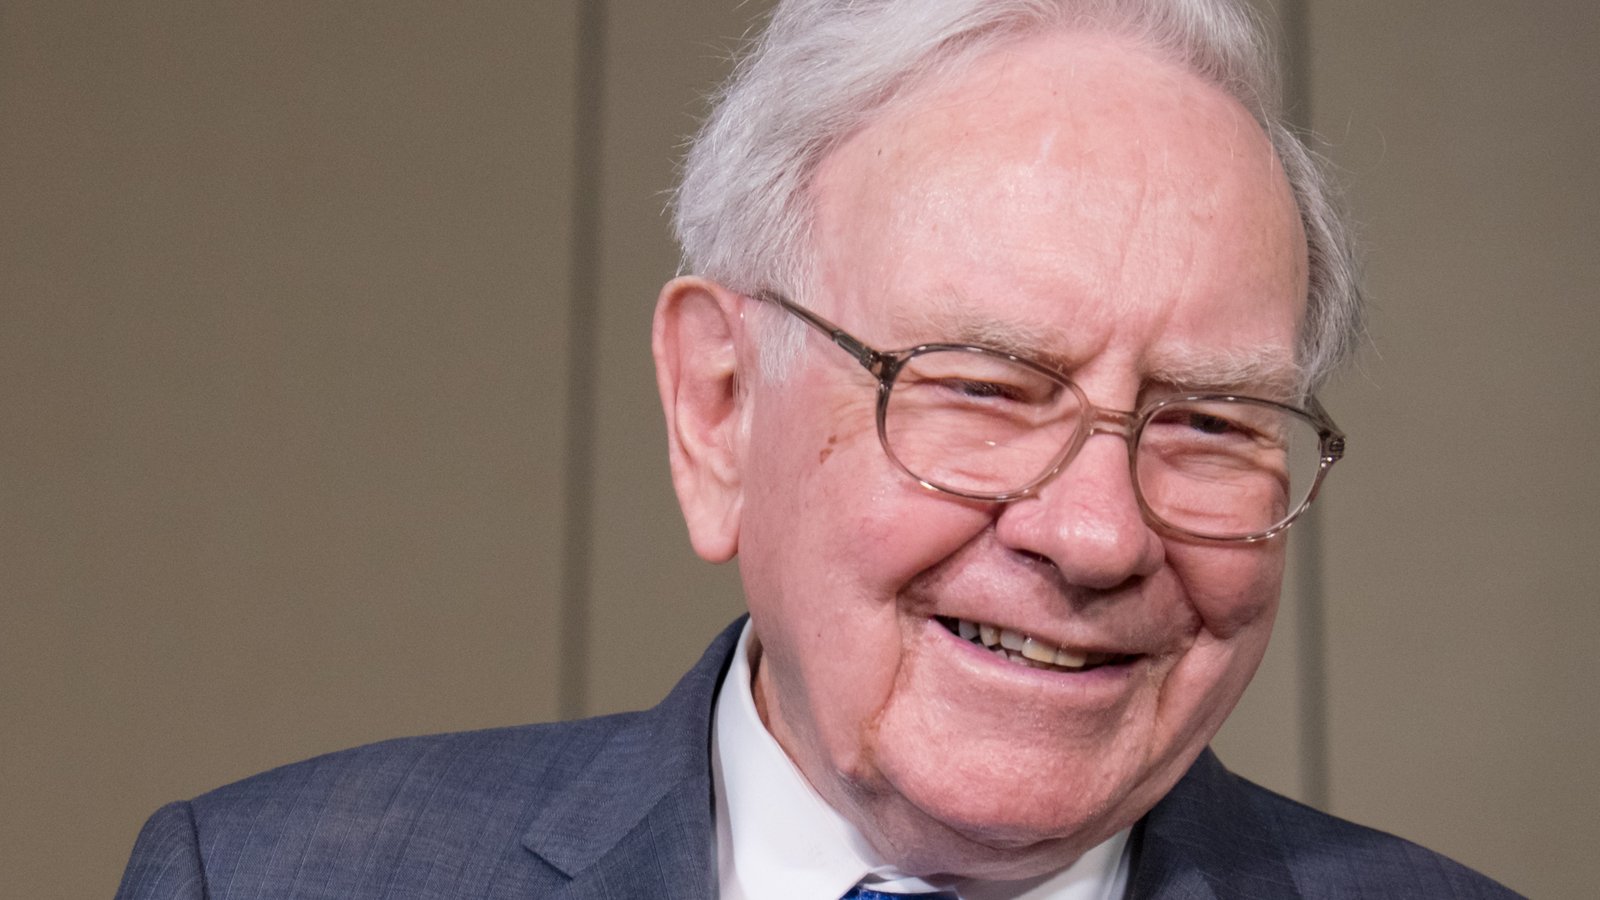 Ticking Time Bombs: 3 Warren Buffett Stocks to Dump Before the Damage Is Done